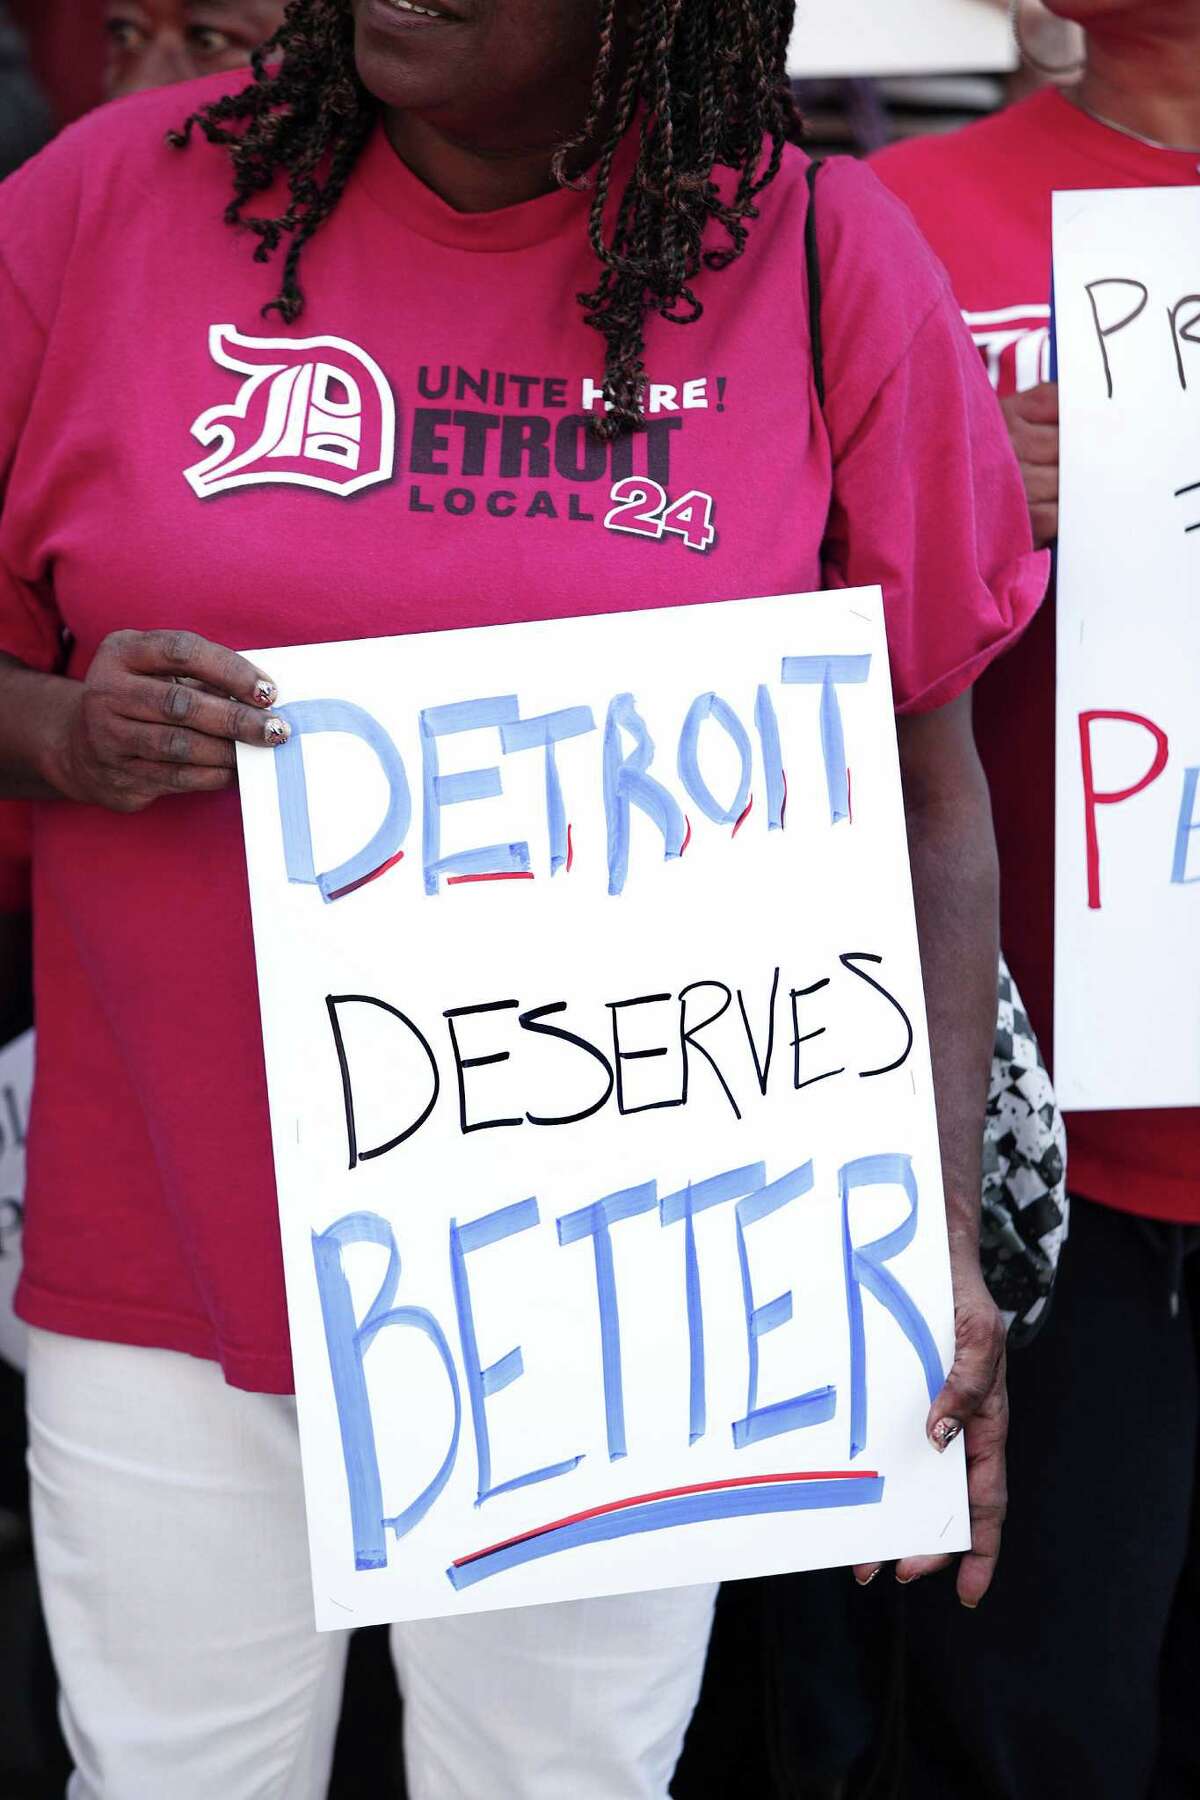 A woman protests Wednesday outside the U.S. Courthouse in Detroit during the city's bankruptcy hearing. Detroit owes approximately 100,000 creditors.